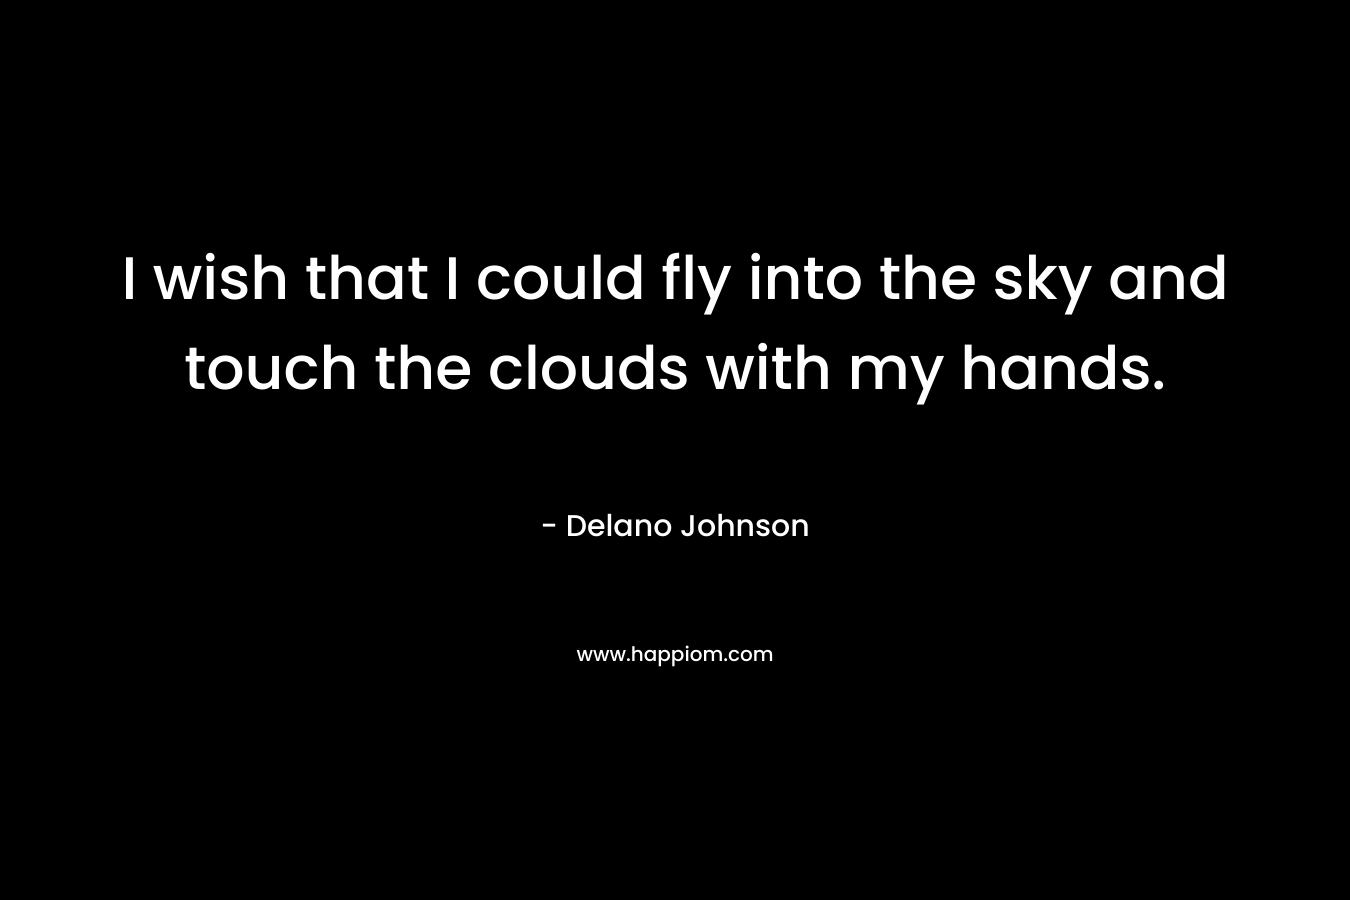 I wish that I could fly into the sky and touch the clouds with my hands.